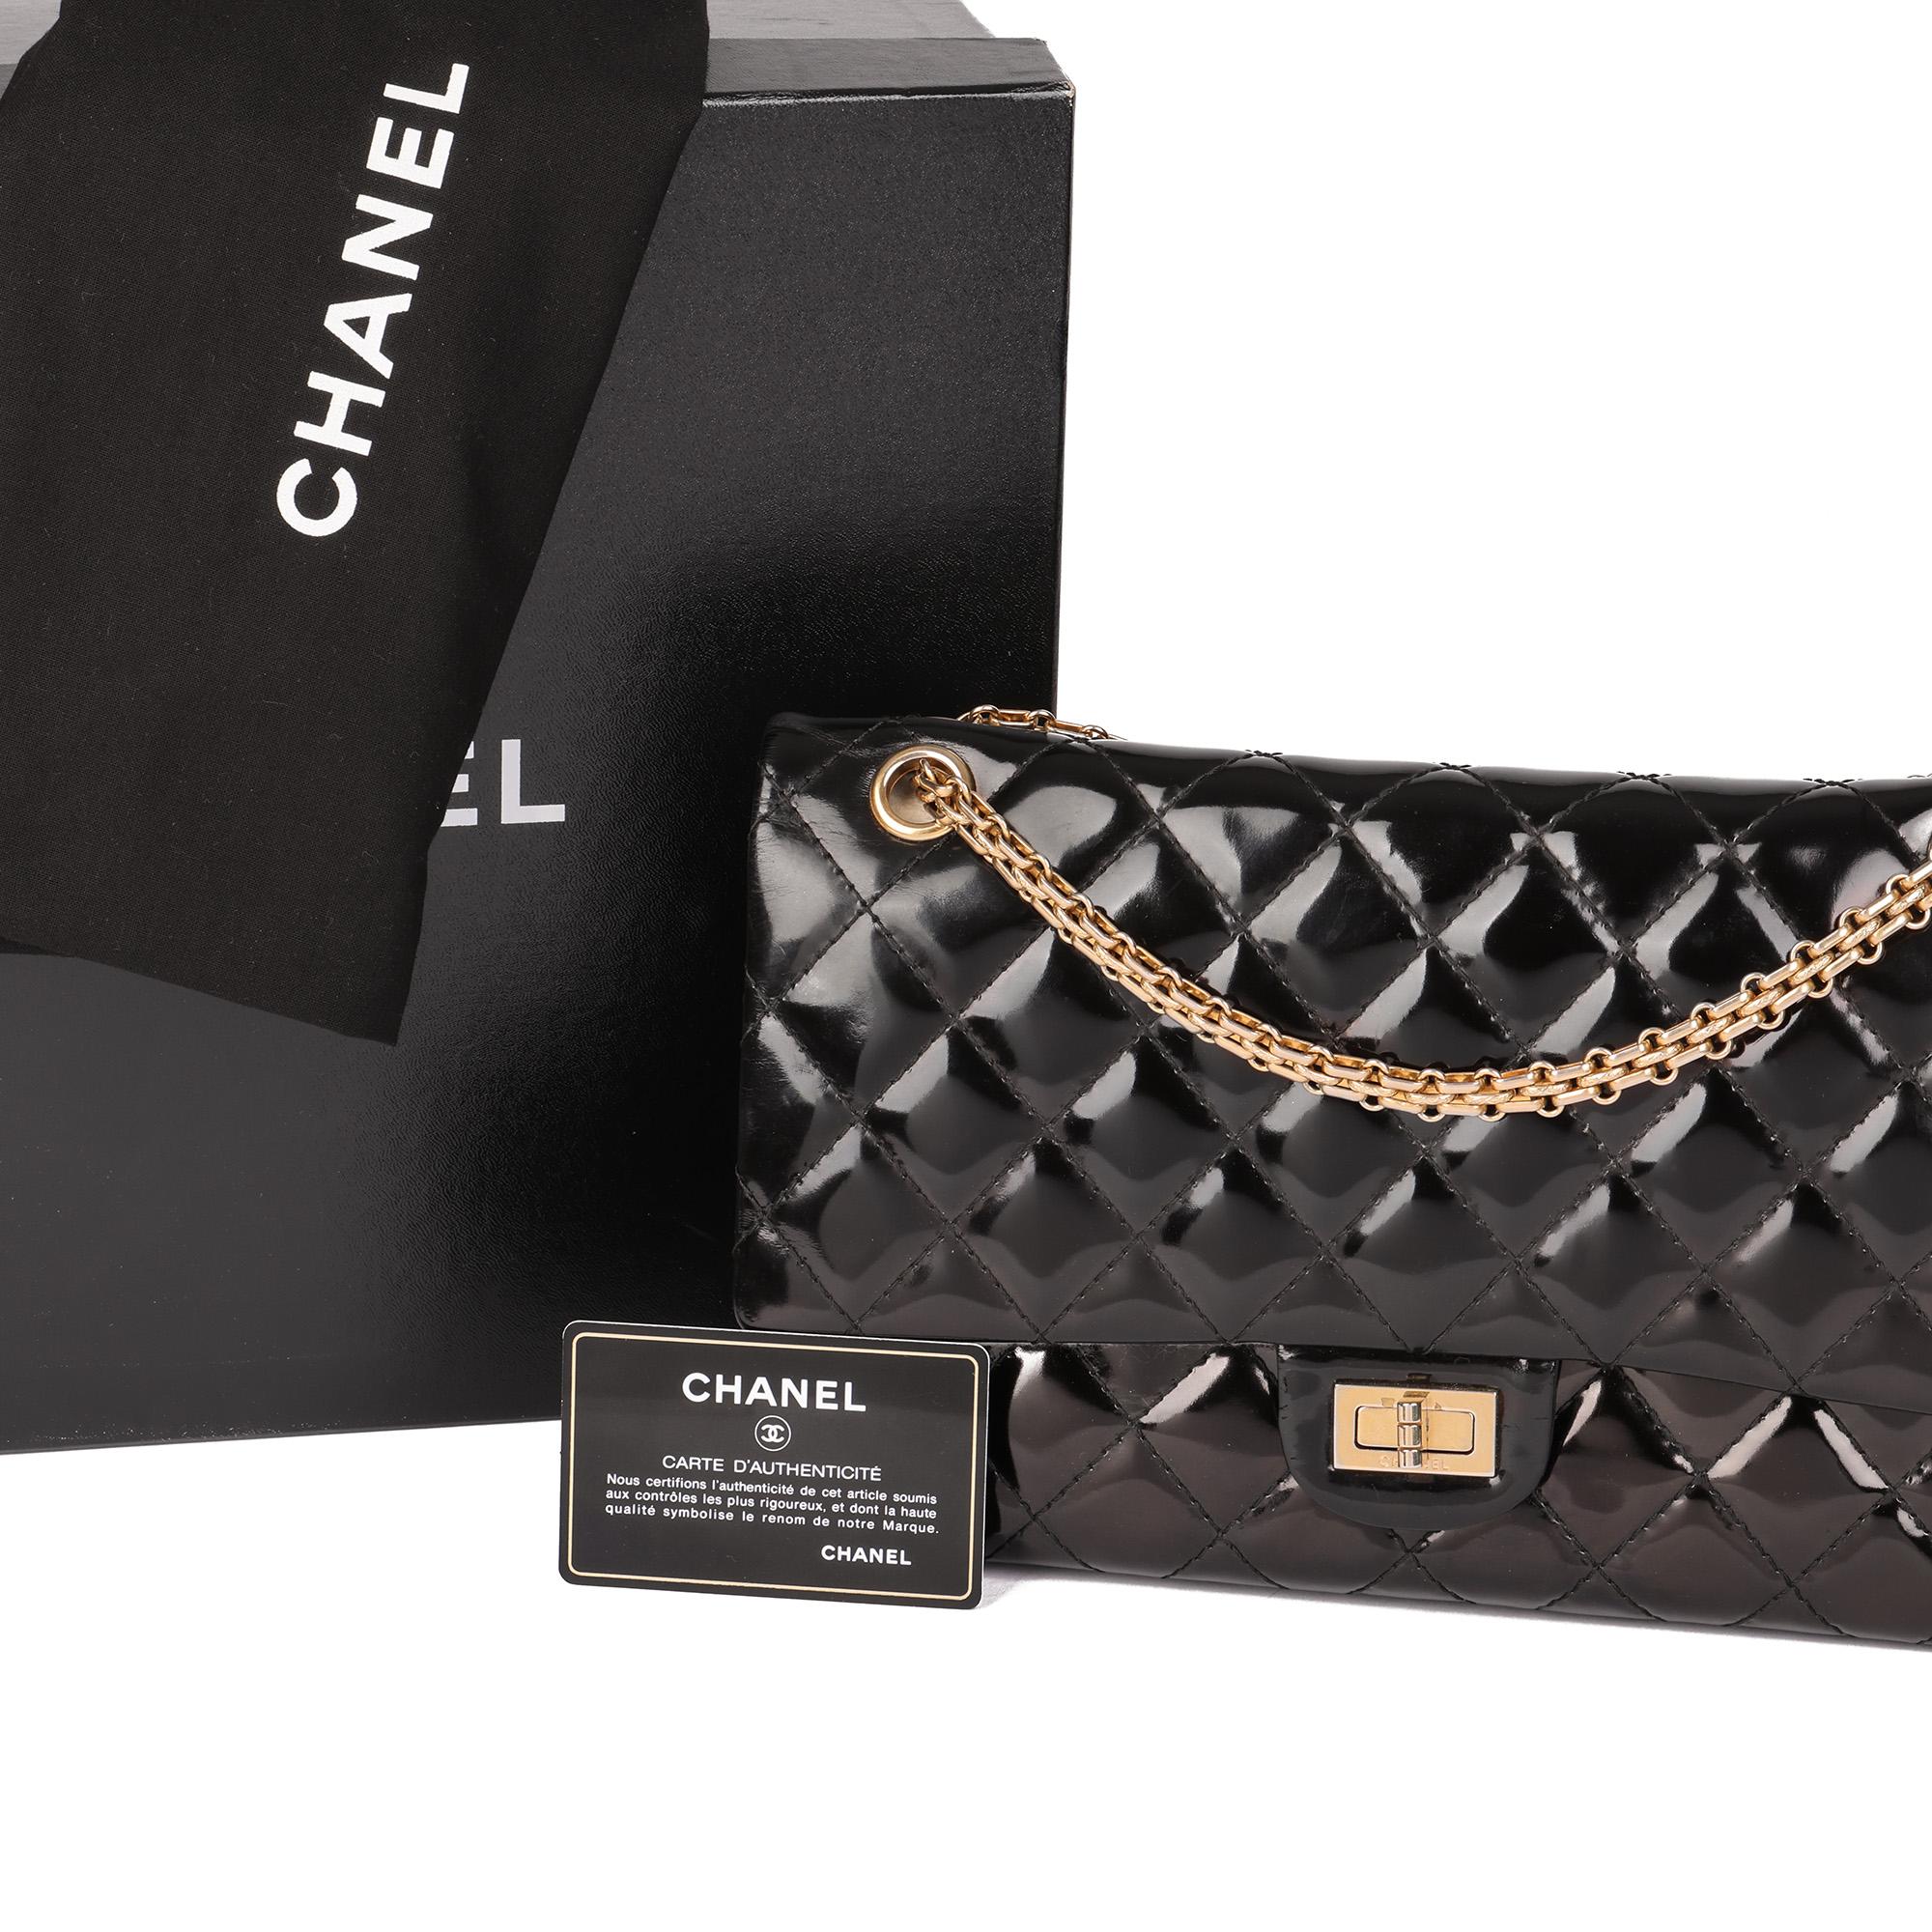 CHANEL Black Quilted Patent Leather 2.44 Reissue 226 Double Flap Bag 7